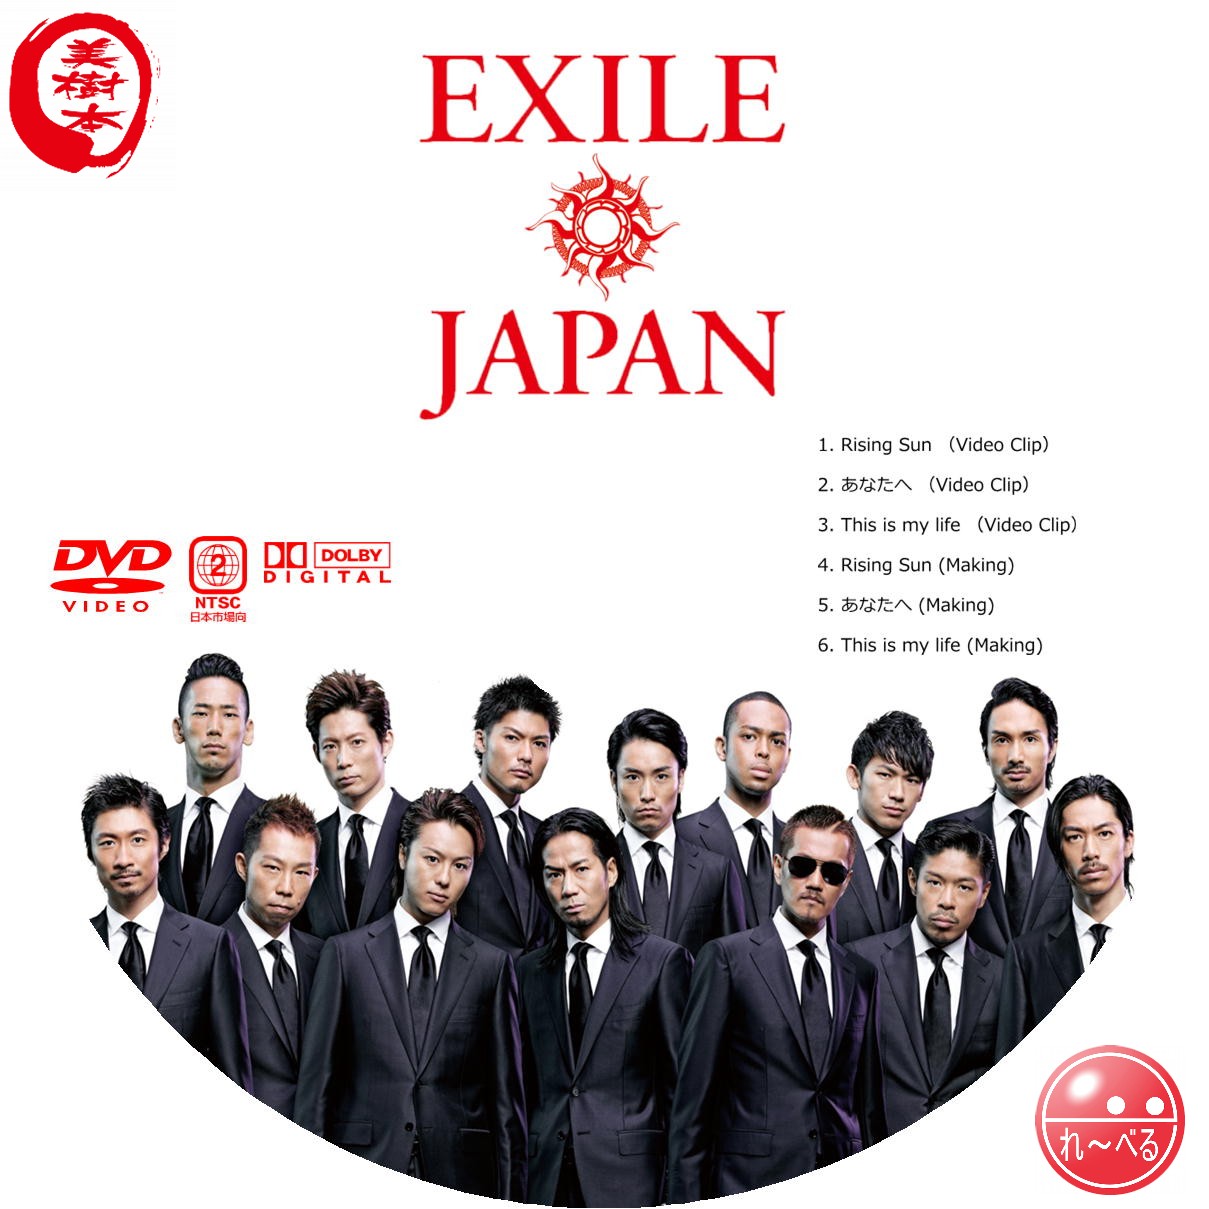 EXILE - EXILE JAPAN / Solo - 自己れ～べる